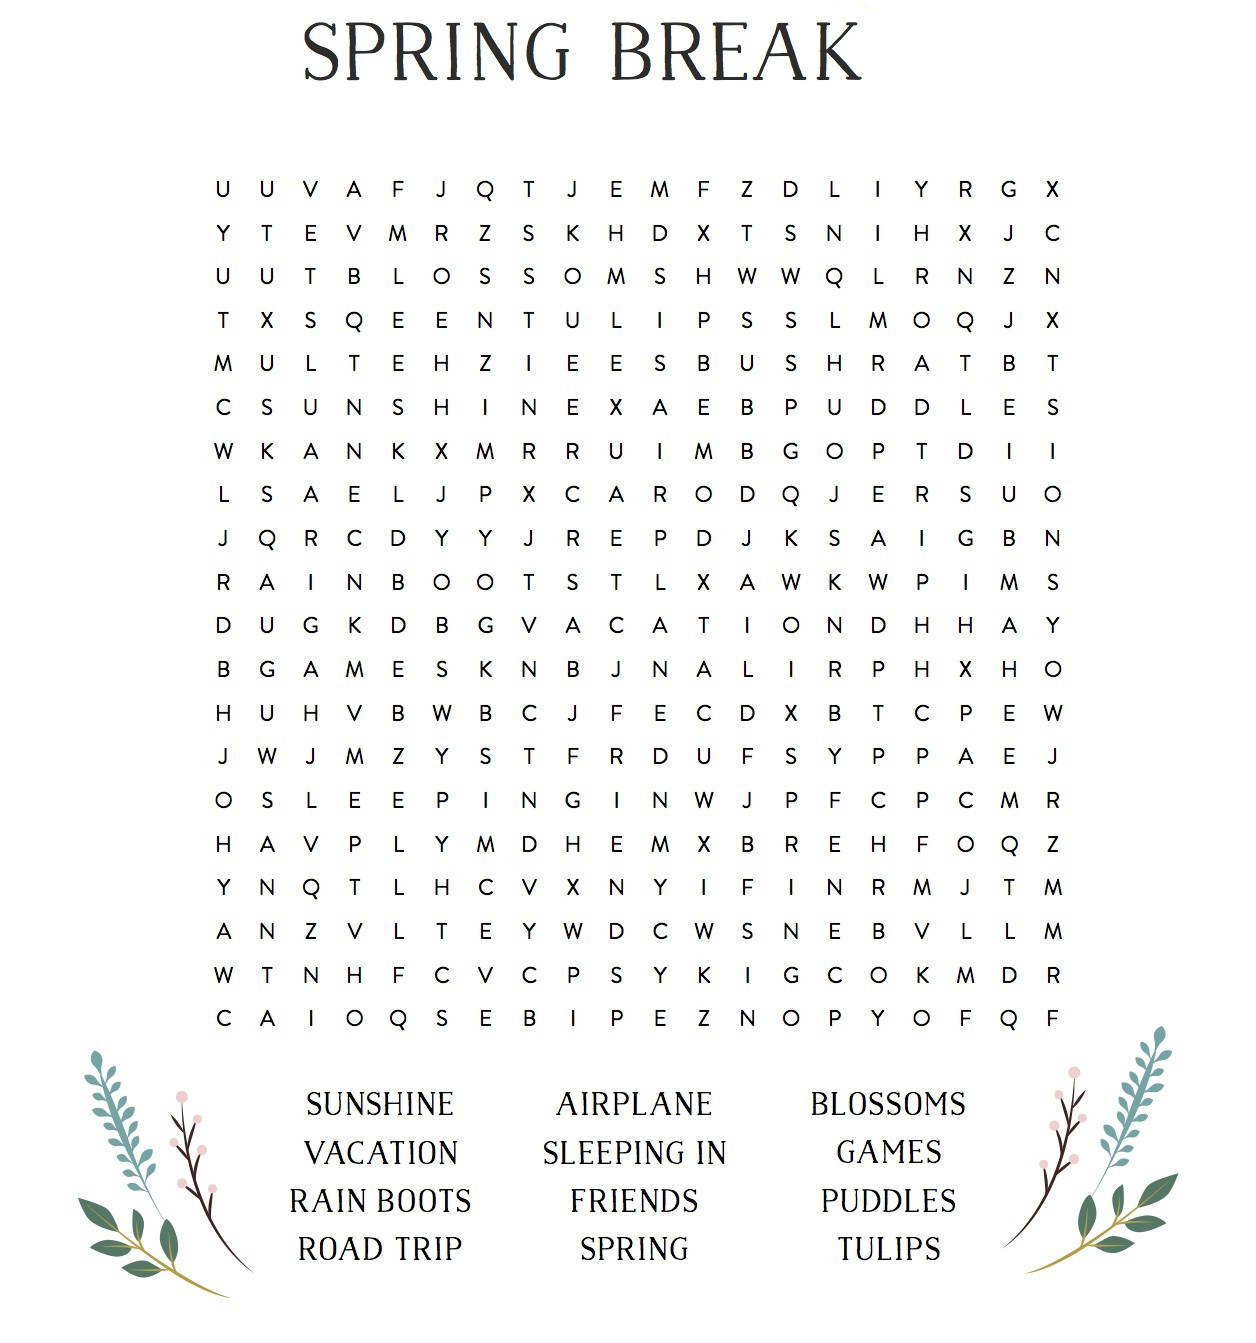 Hard Spring Word Search